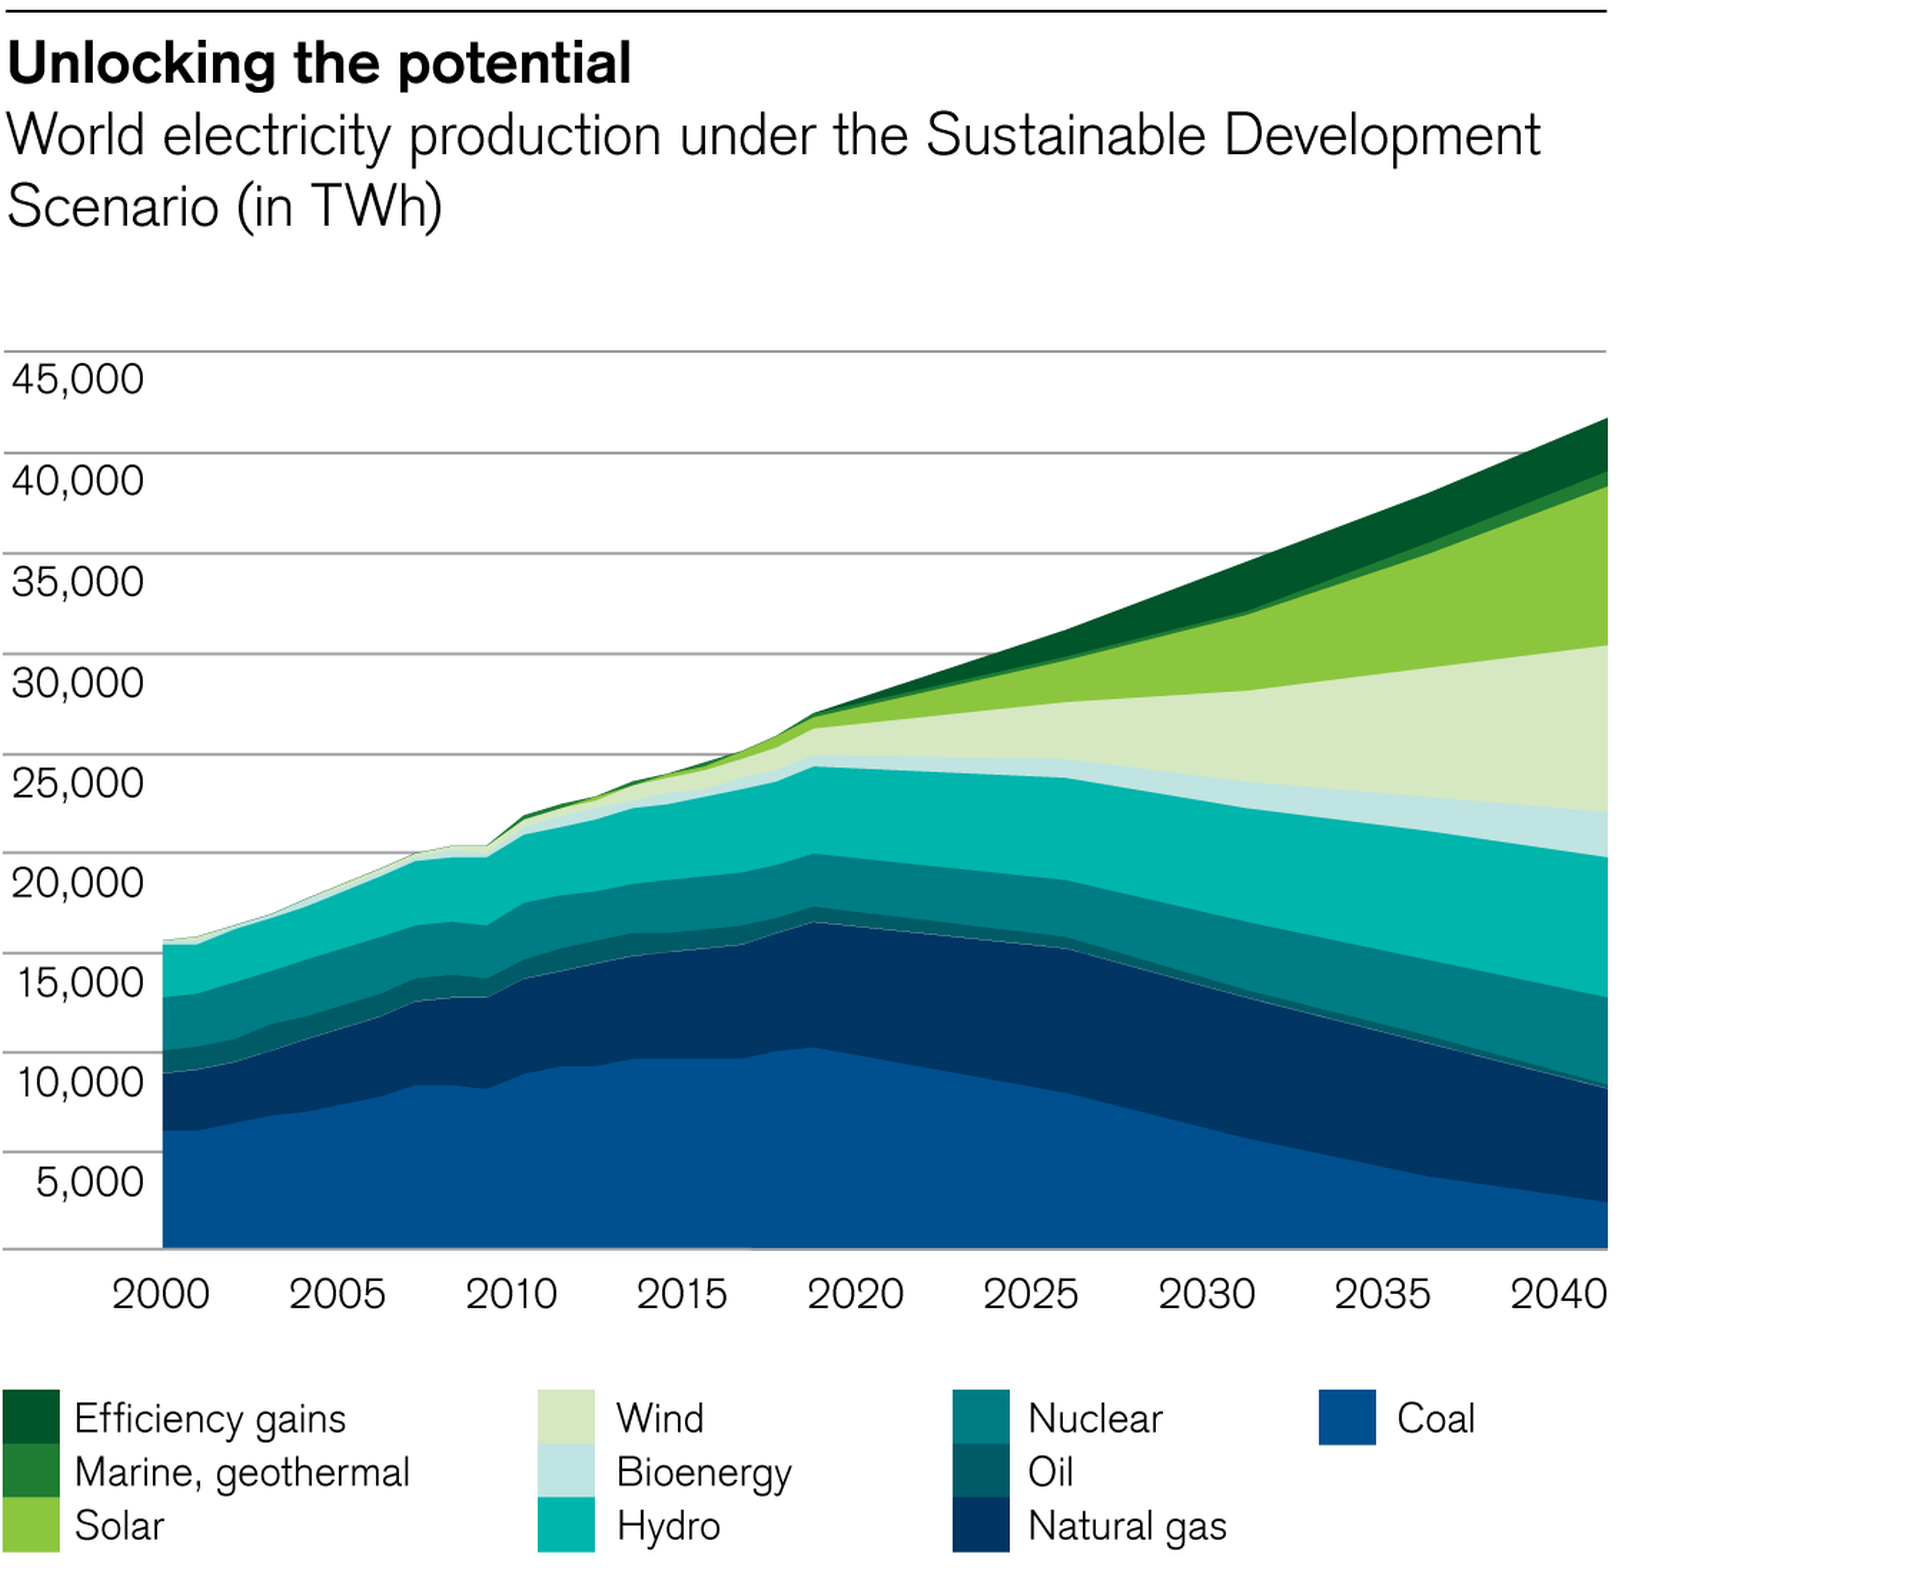 World electricity production under the Sustainable Development Scenario (in TWh)